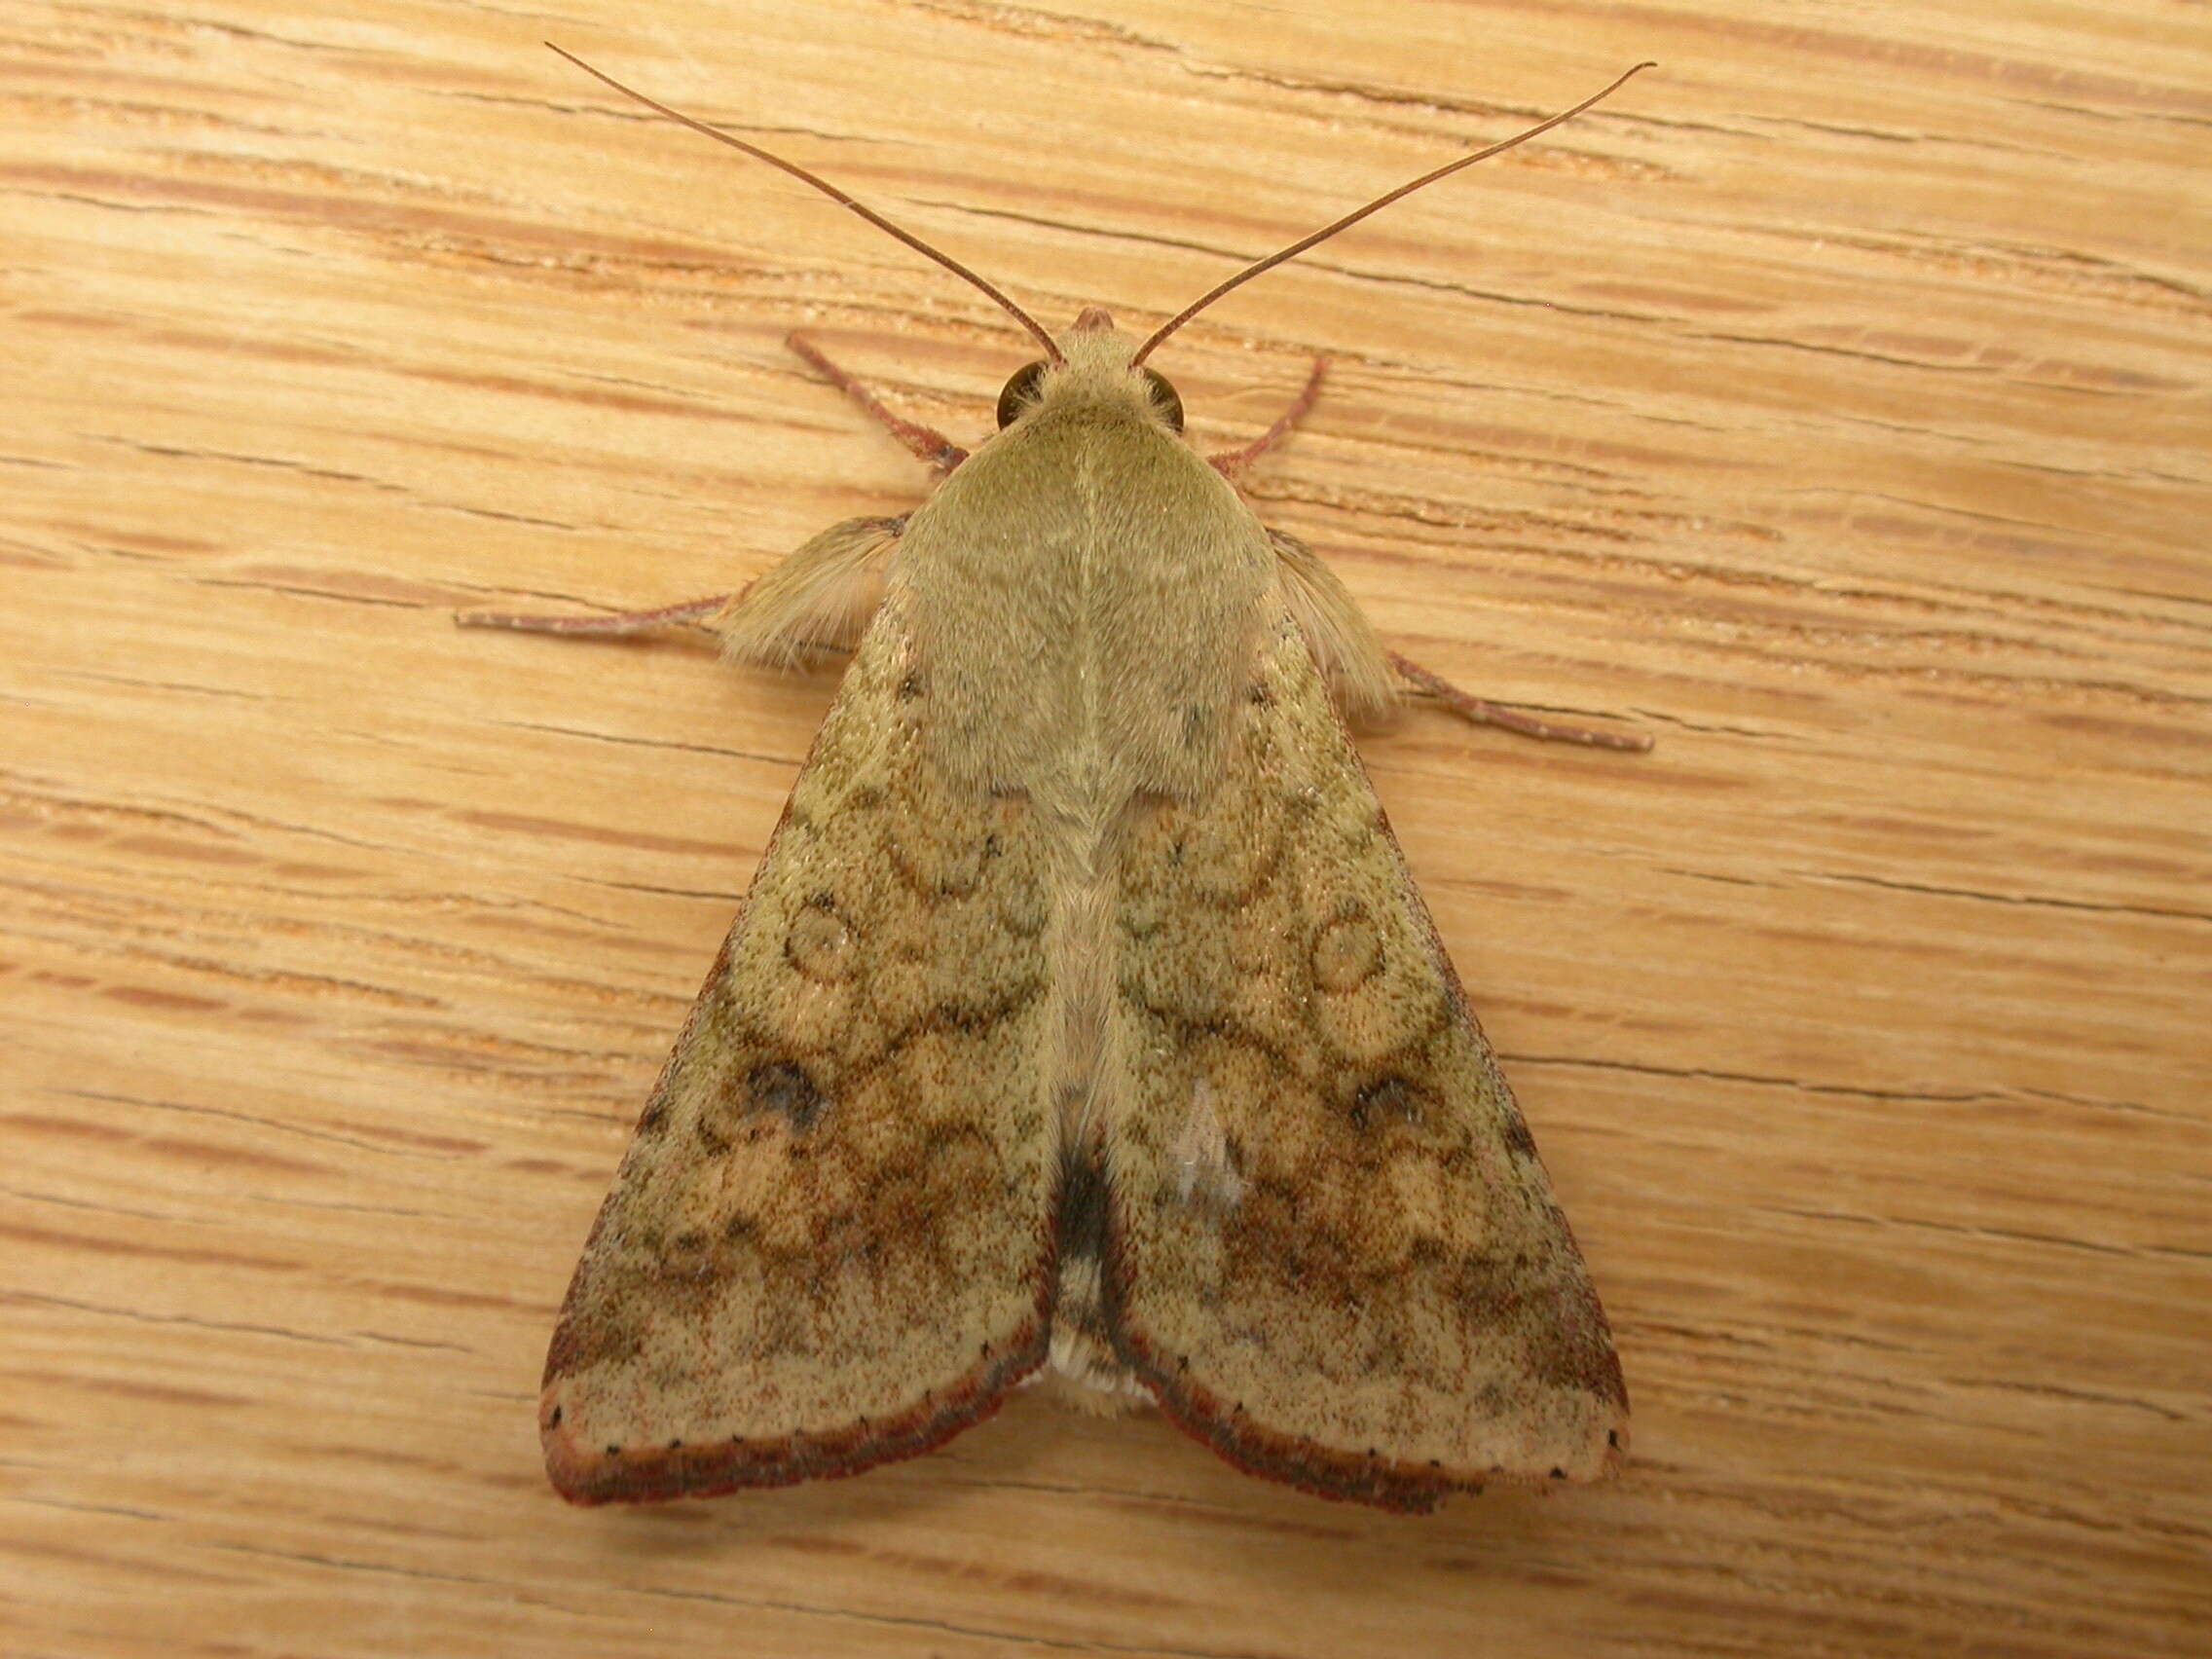 Image of cotton bollworm